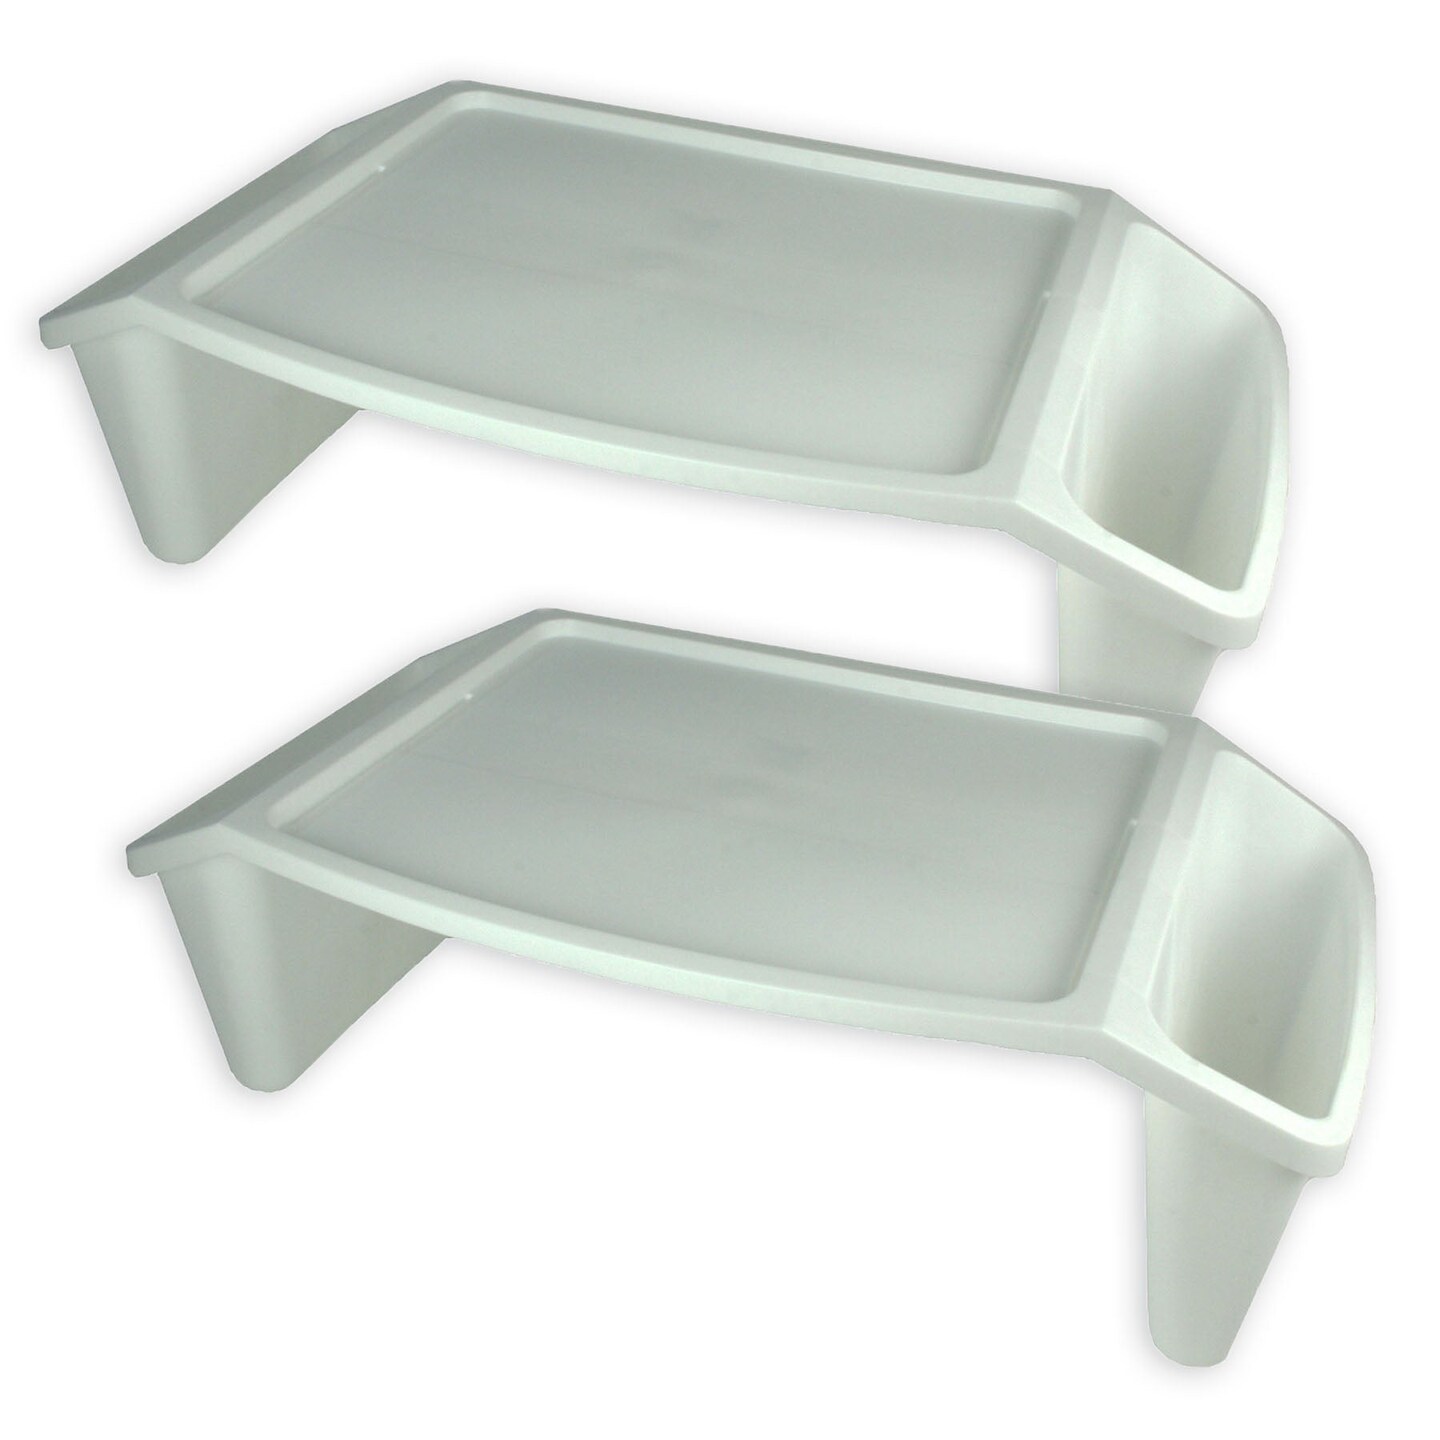 Lap Tray, White, Pack of 2